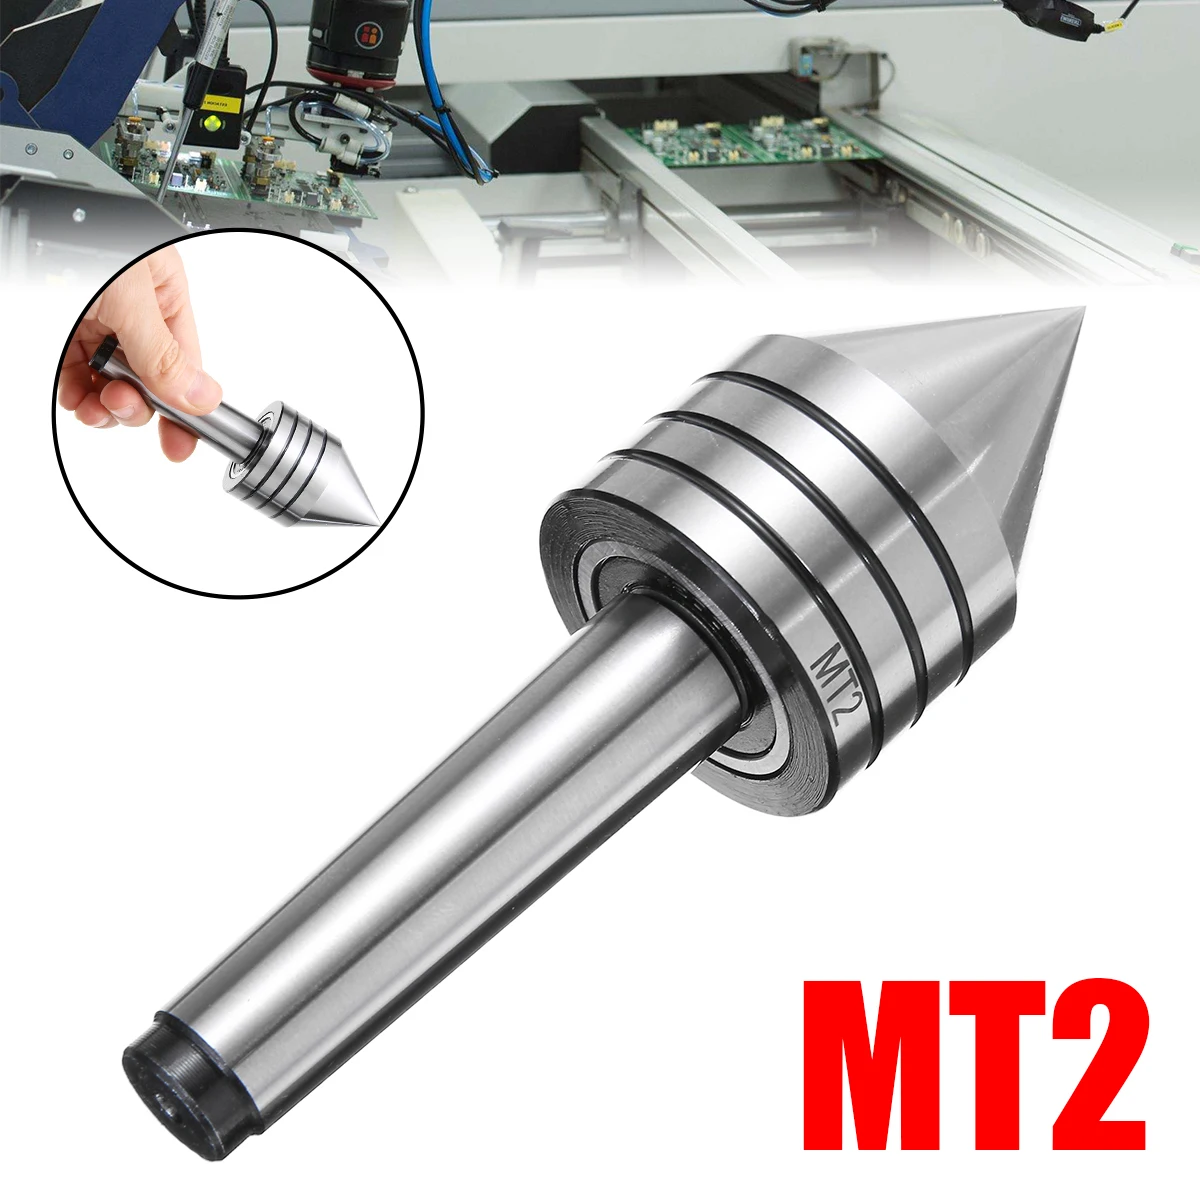 MT2 Precision Center Morse Taper Bearing Lathe Turning Heavy Duty Industrial Use 